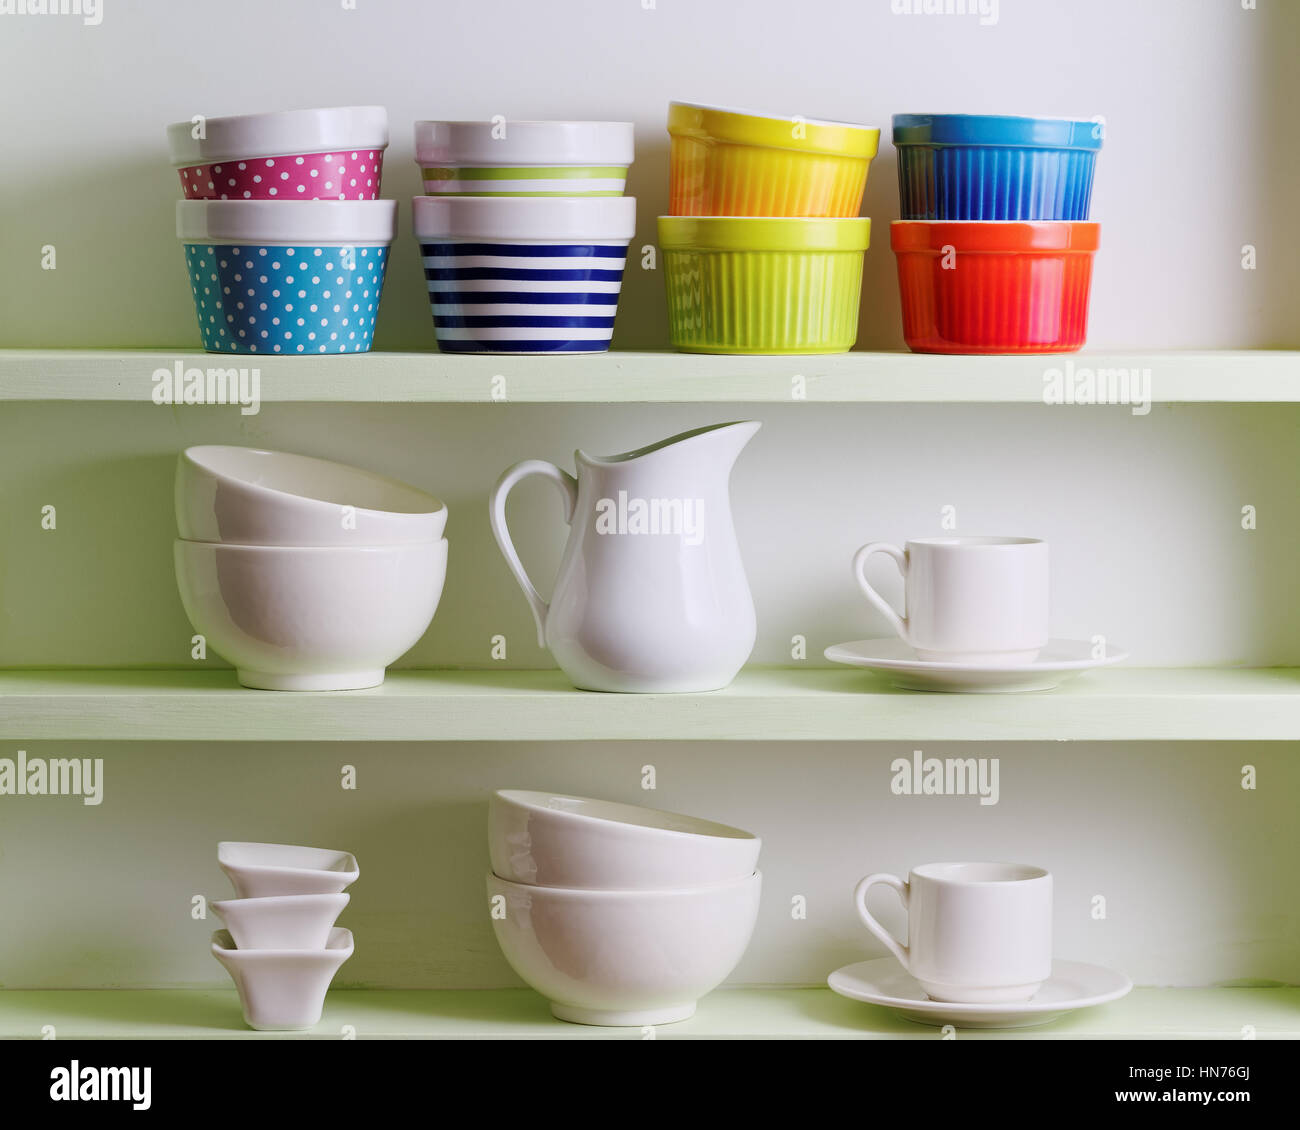 Variety of ceramics on shelf. Colorful bowls, cups and white dishware. Stock Photo